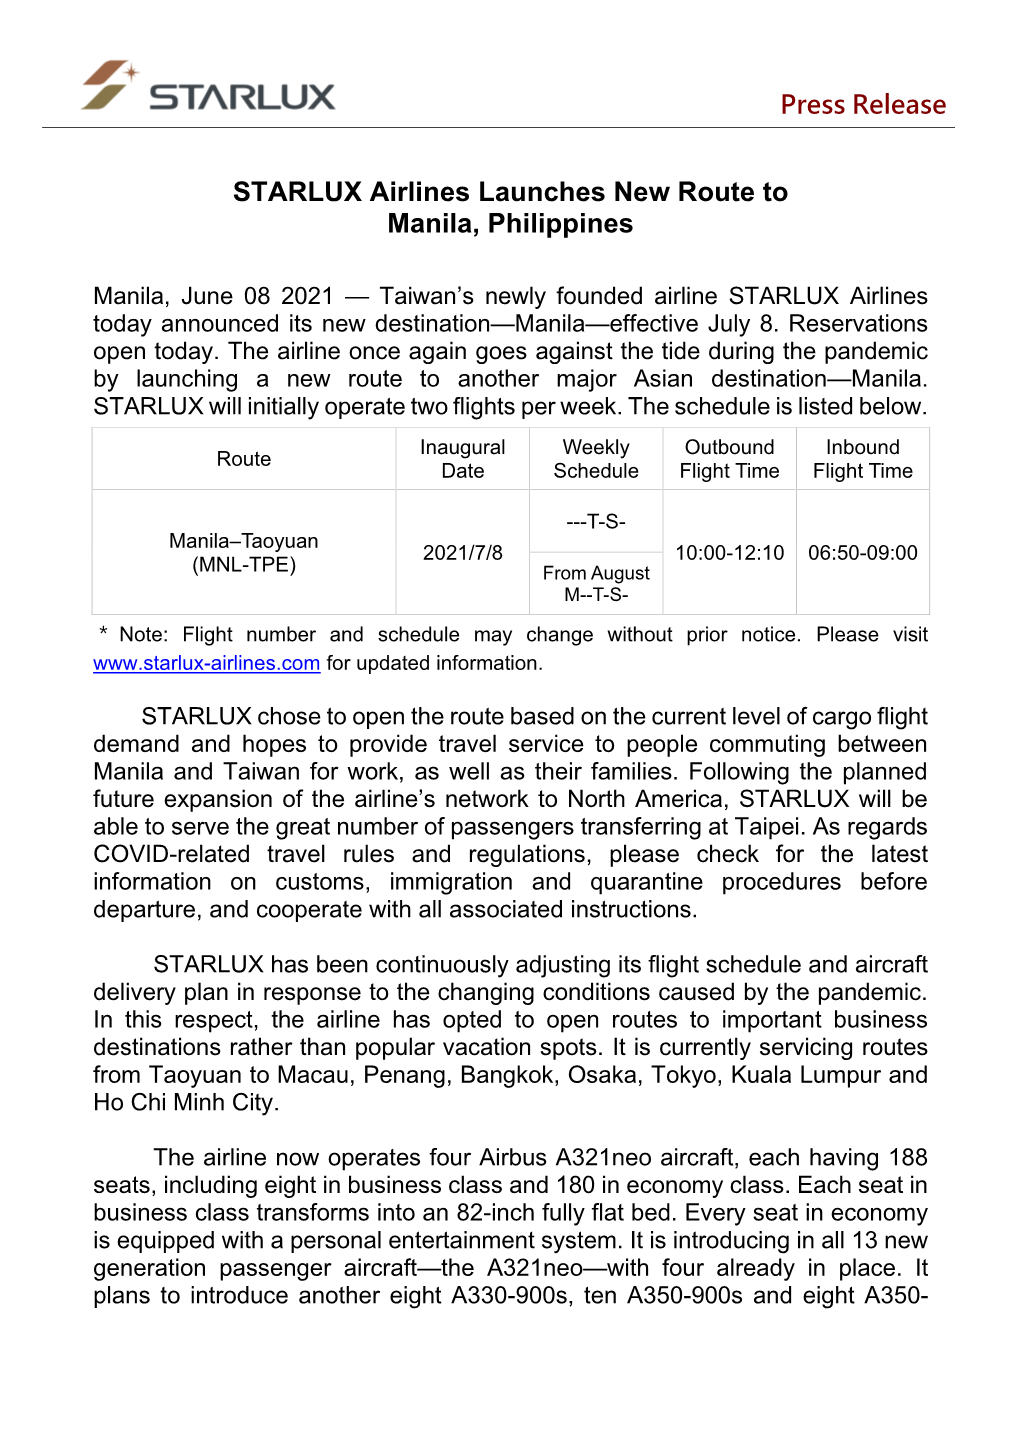 STARLUX Airlines Launches New Route to Manila, Philippines